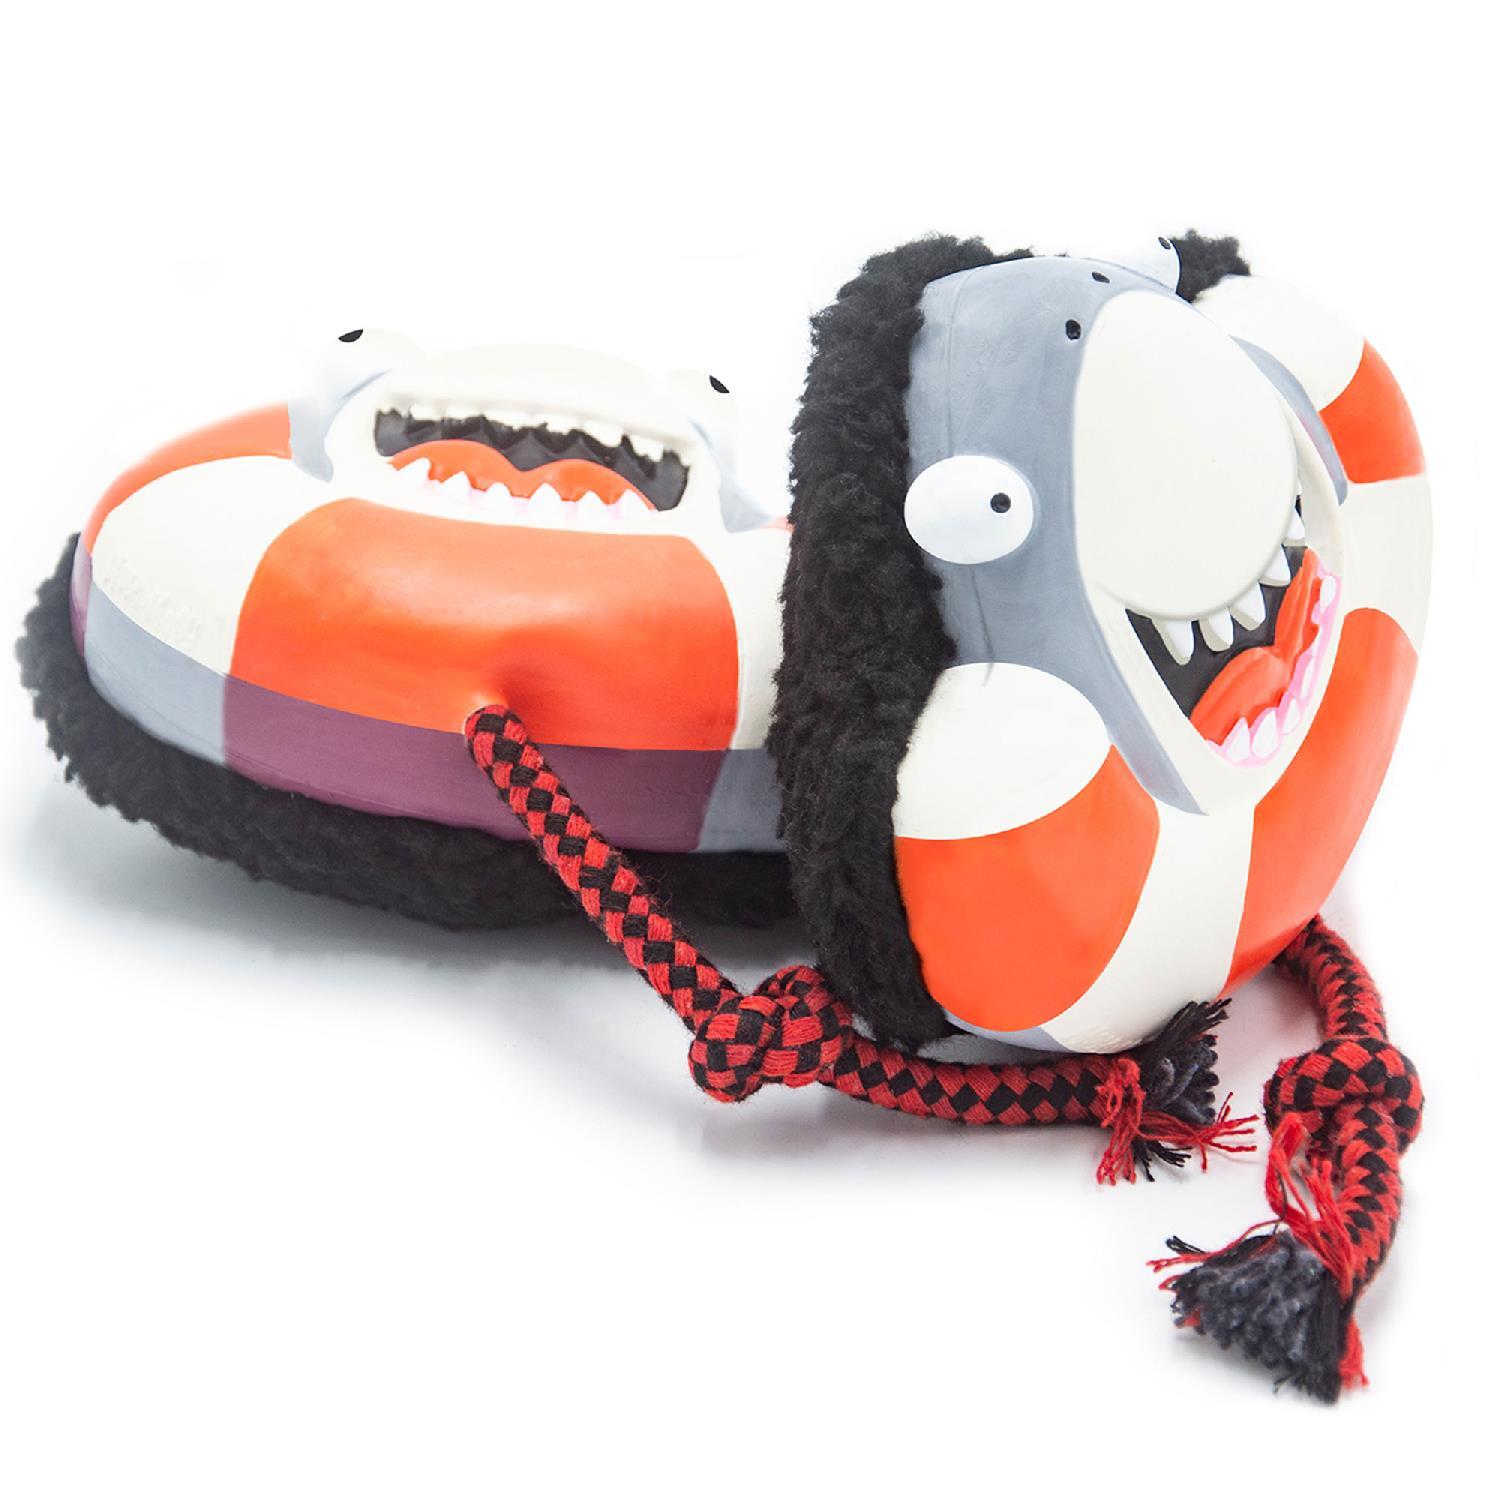 Max & Molly Squeaker Snuggles Dog Toy - Frenzy the Shark image 0